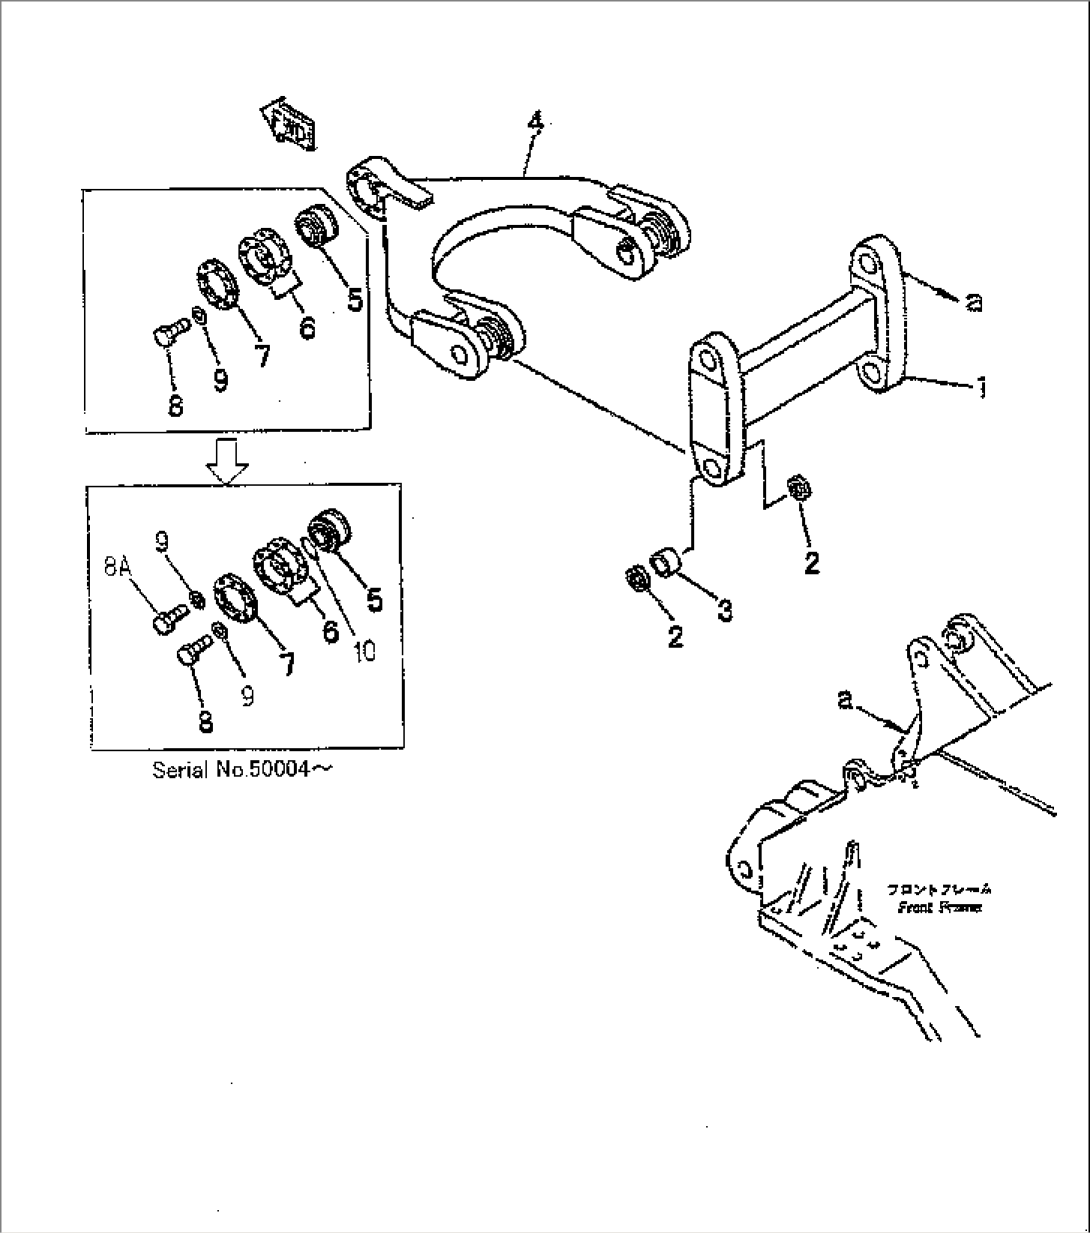 DOZER AND LINKAGE (CENTER SUPPORT)(#50001-50041)